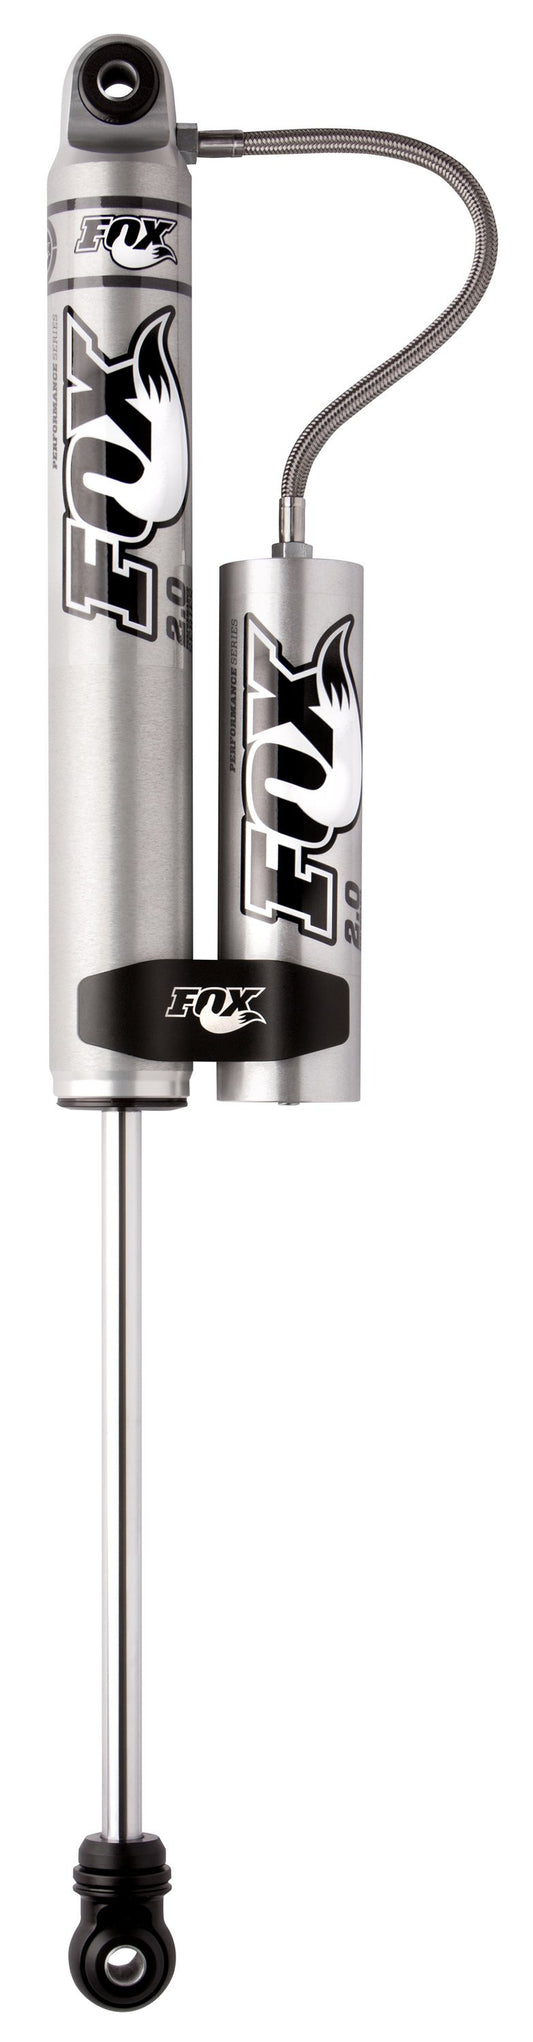 PERFORMANCE SERIES 2.0 SMOOTH BODY RESERVOIR SHOCK Lift: 0-1 2015 Ford F-450 Super Duty FOX-985-24-104 - 2.0 SHOCK - FOX Offroad Shocks - Texas Complete Truck Center